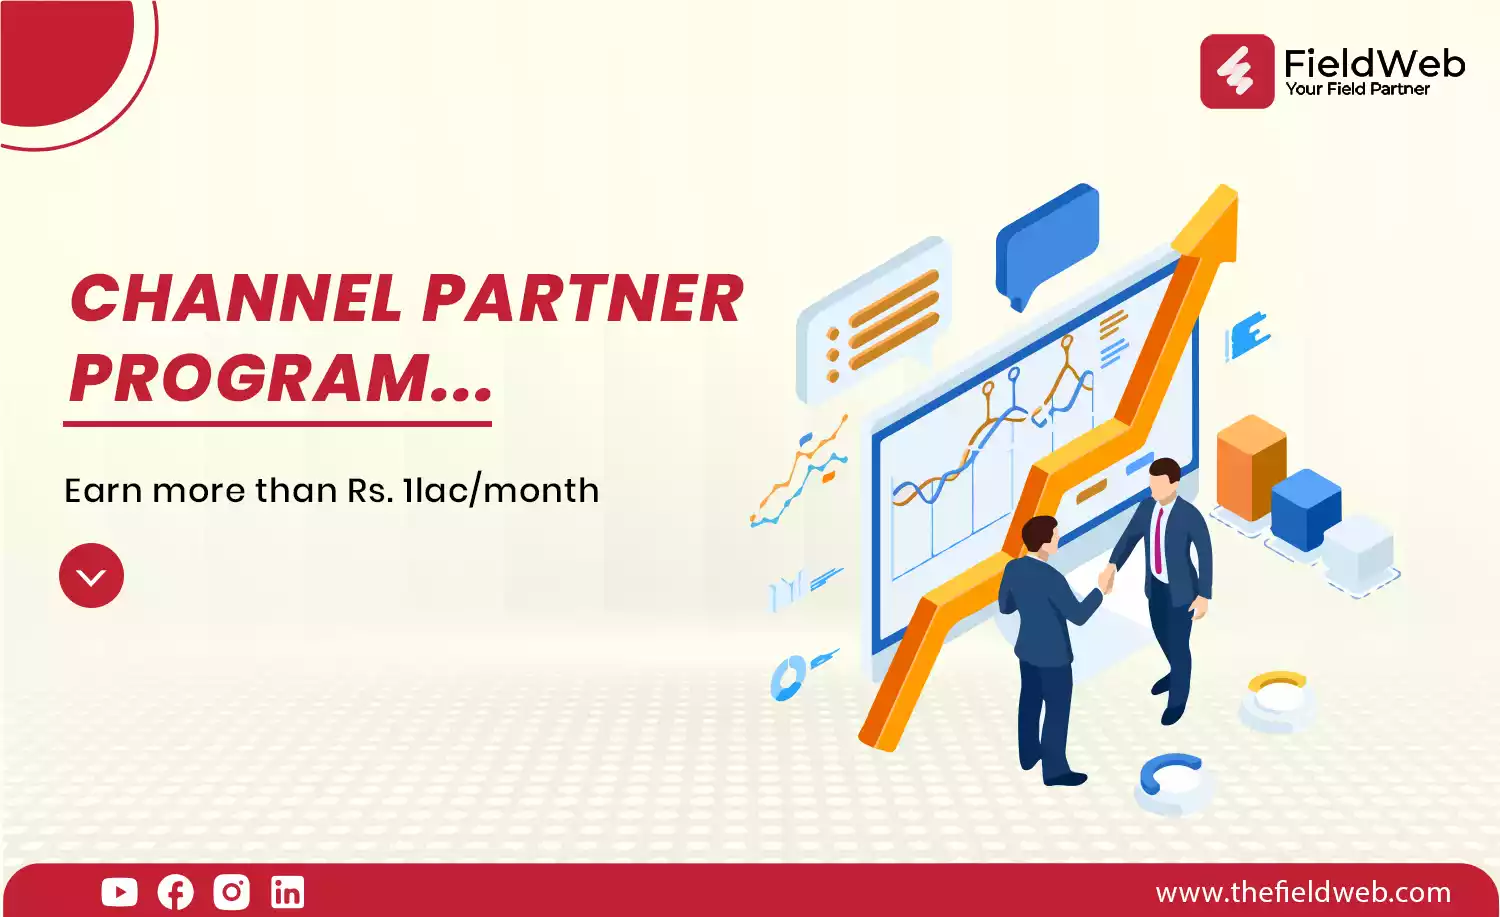 FieldWeb channel partner earn more than Rs.1 lac/month